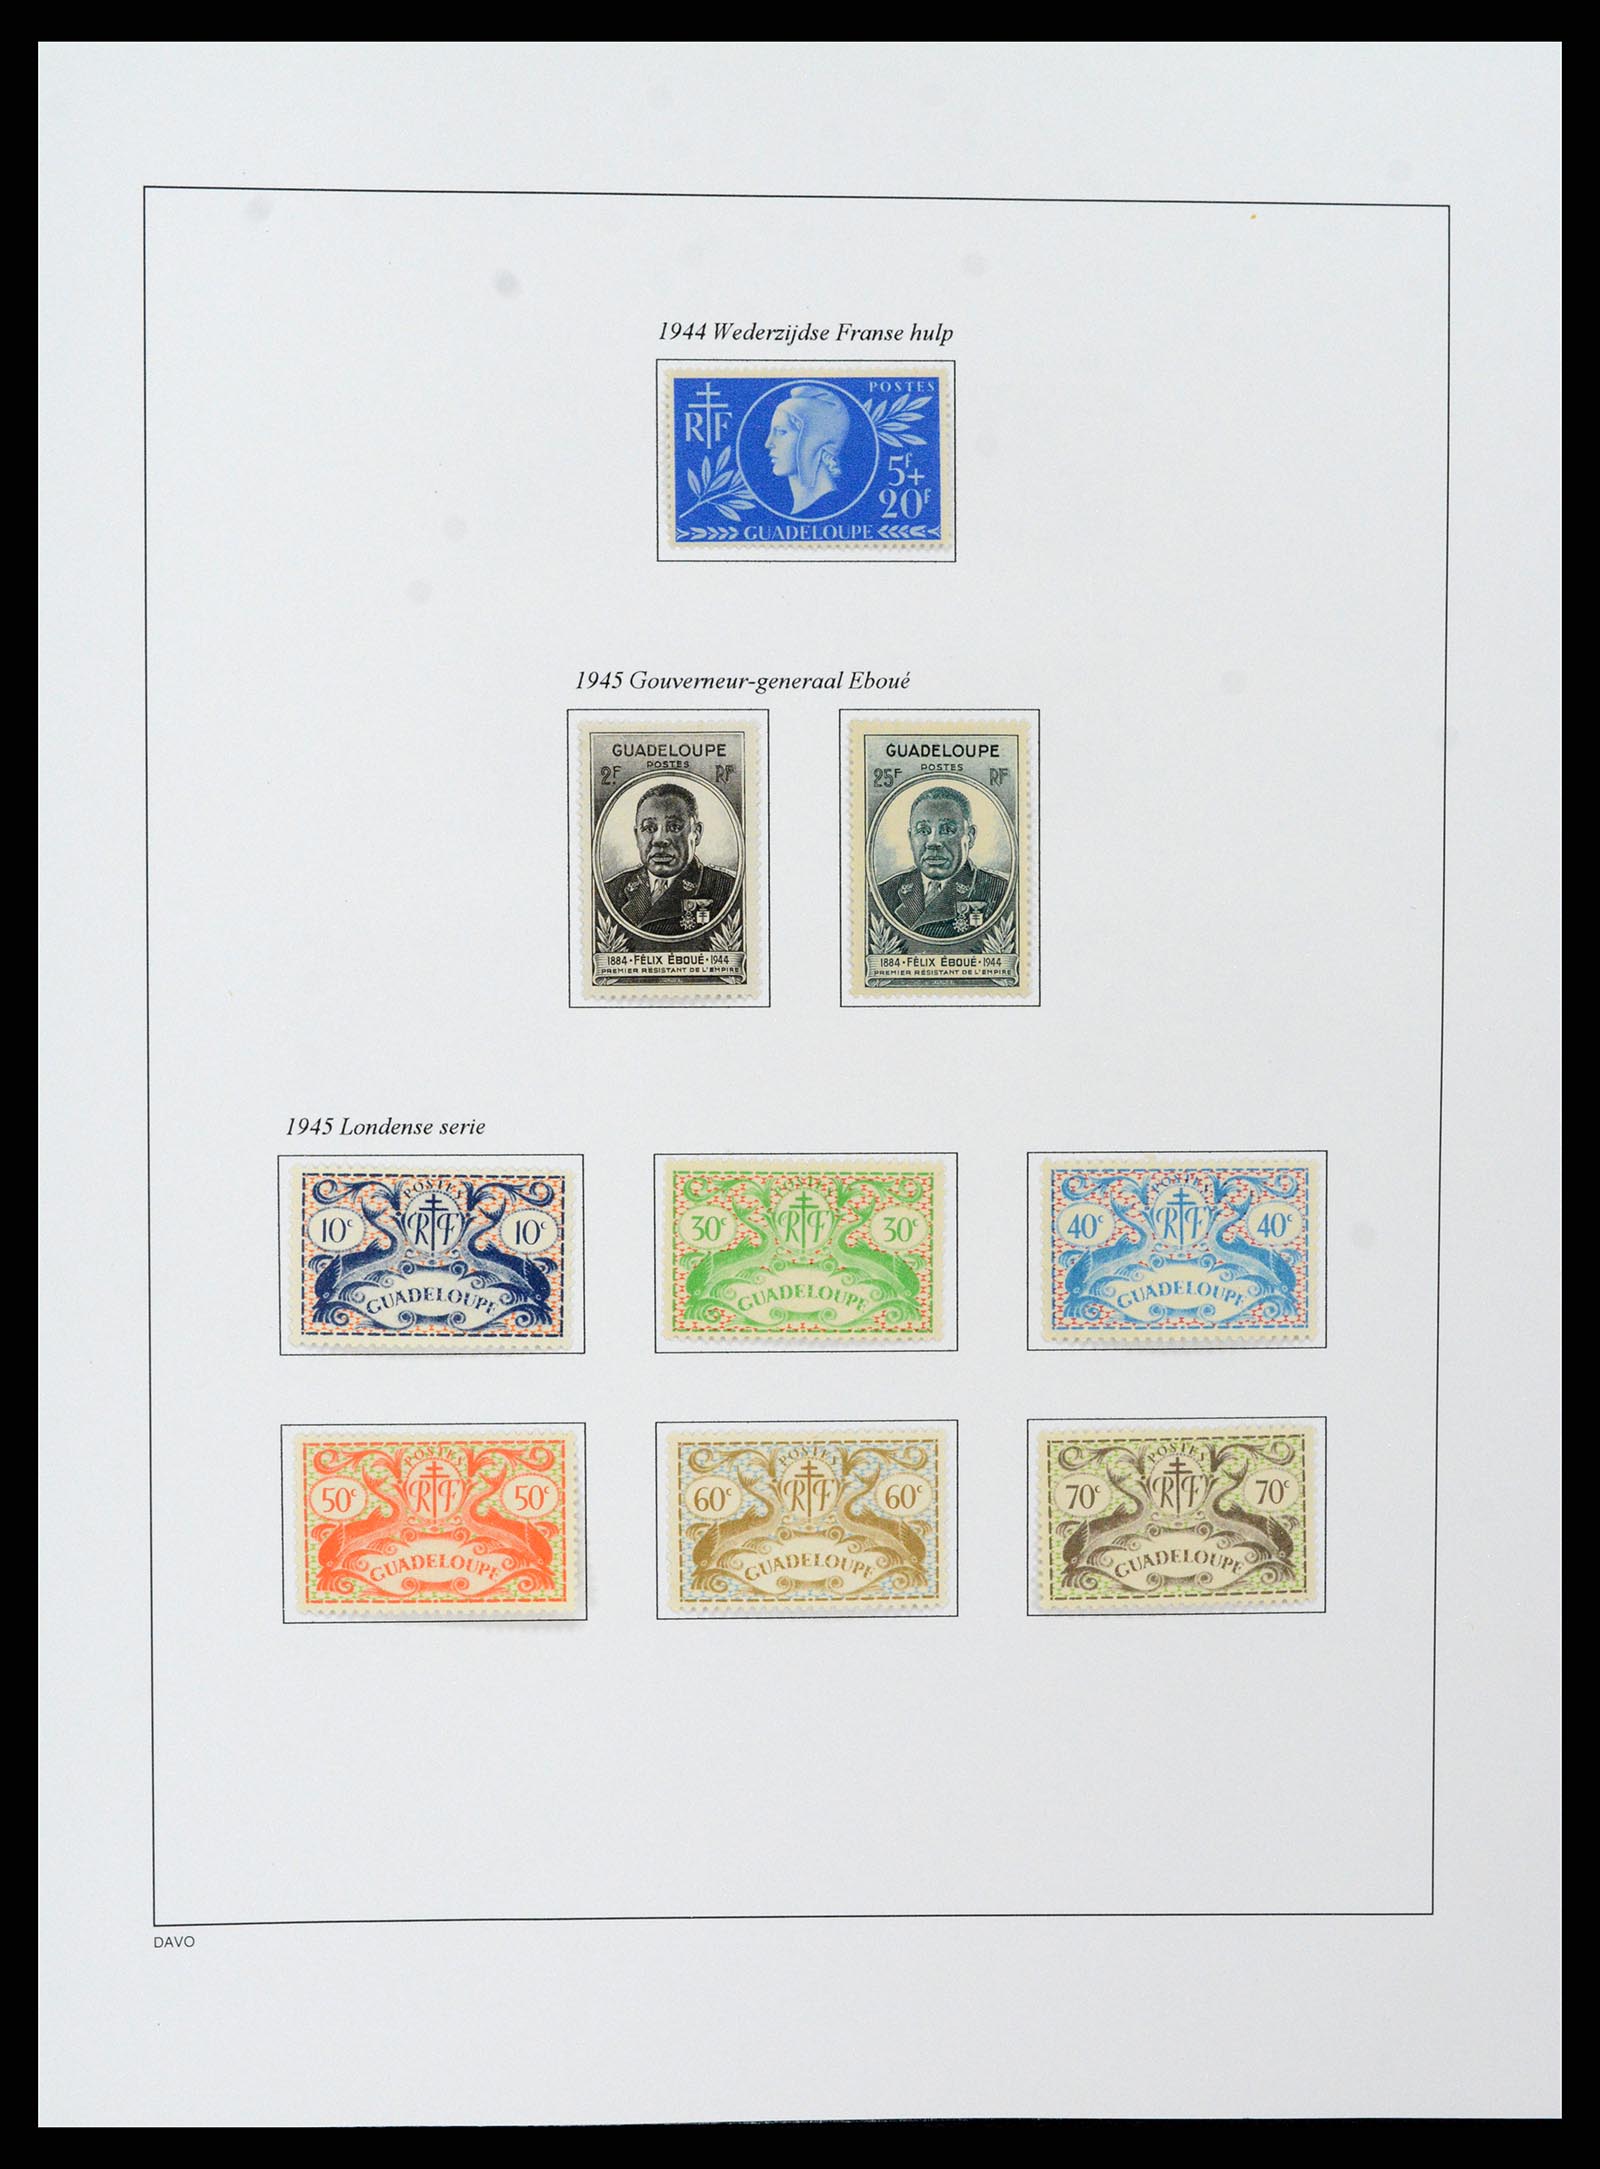 37480 073 - Stamp collection 37480 Guadeloupe supercollection 1823-1947.